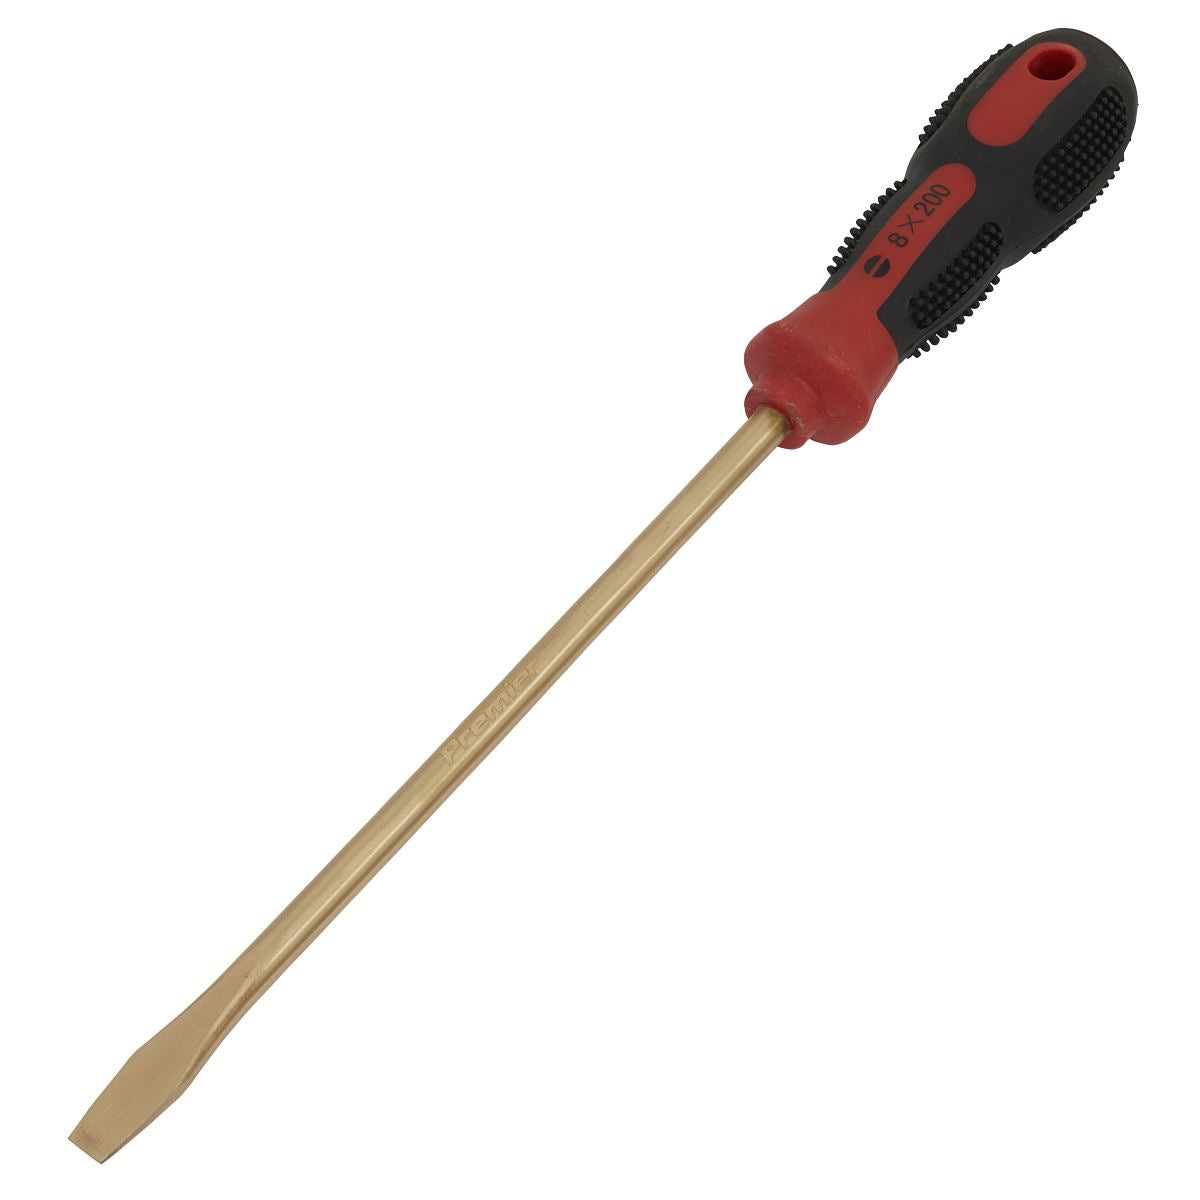 Sealey Premier Screwdriver Slotted 8 x 200mm - Non-Sparking